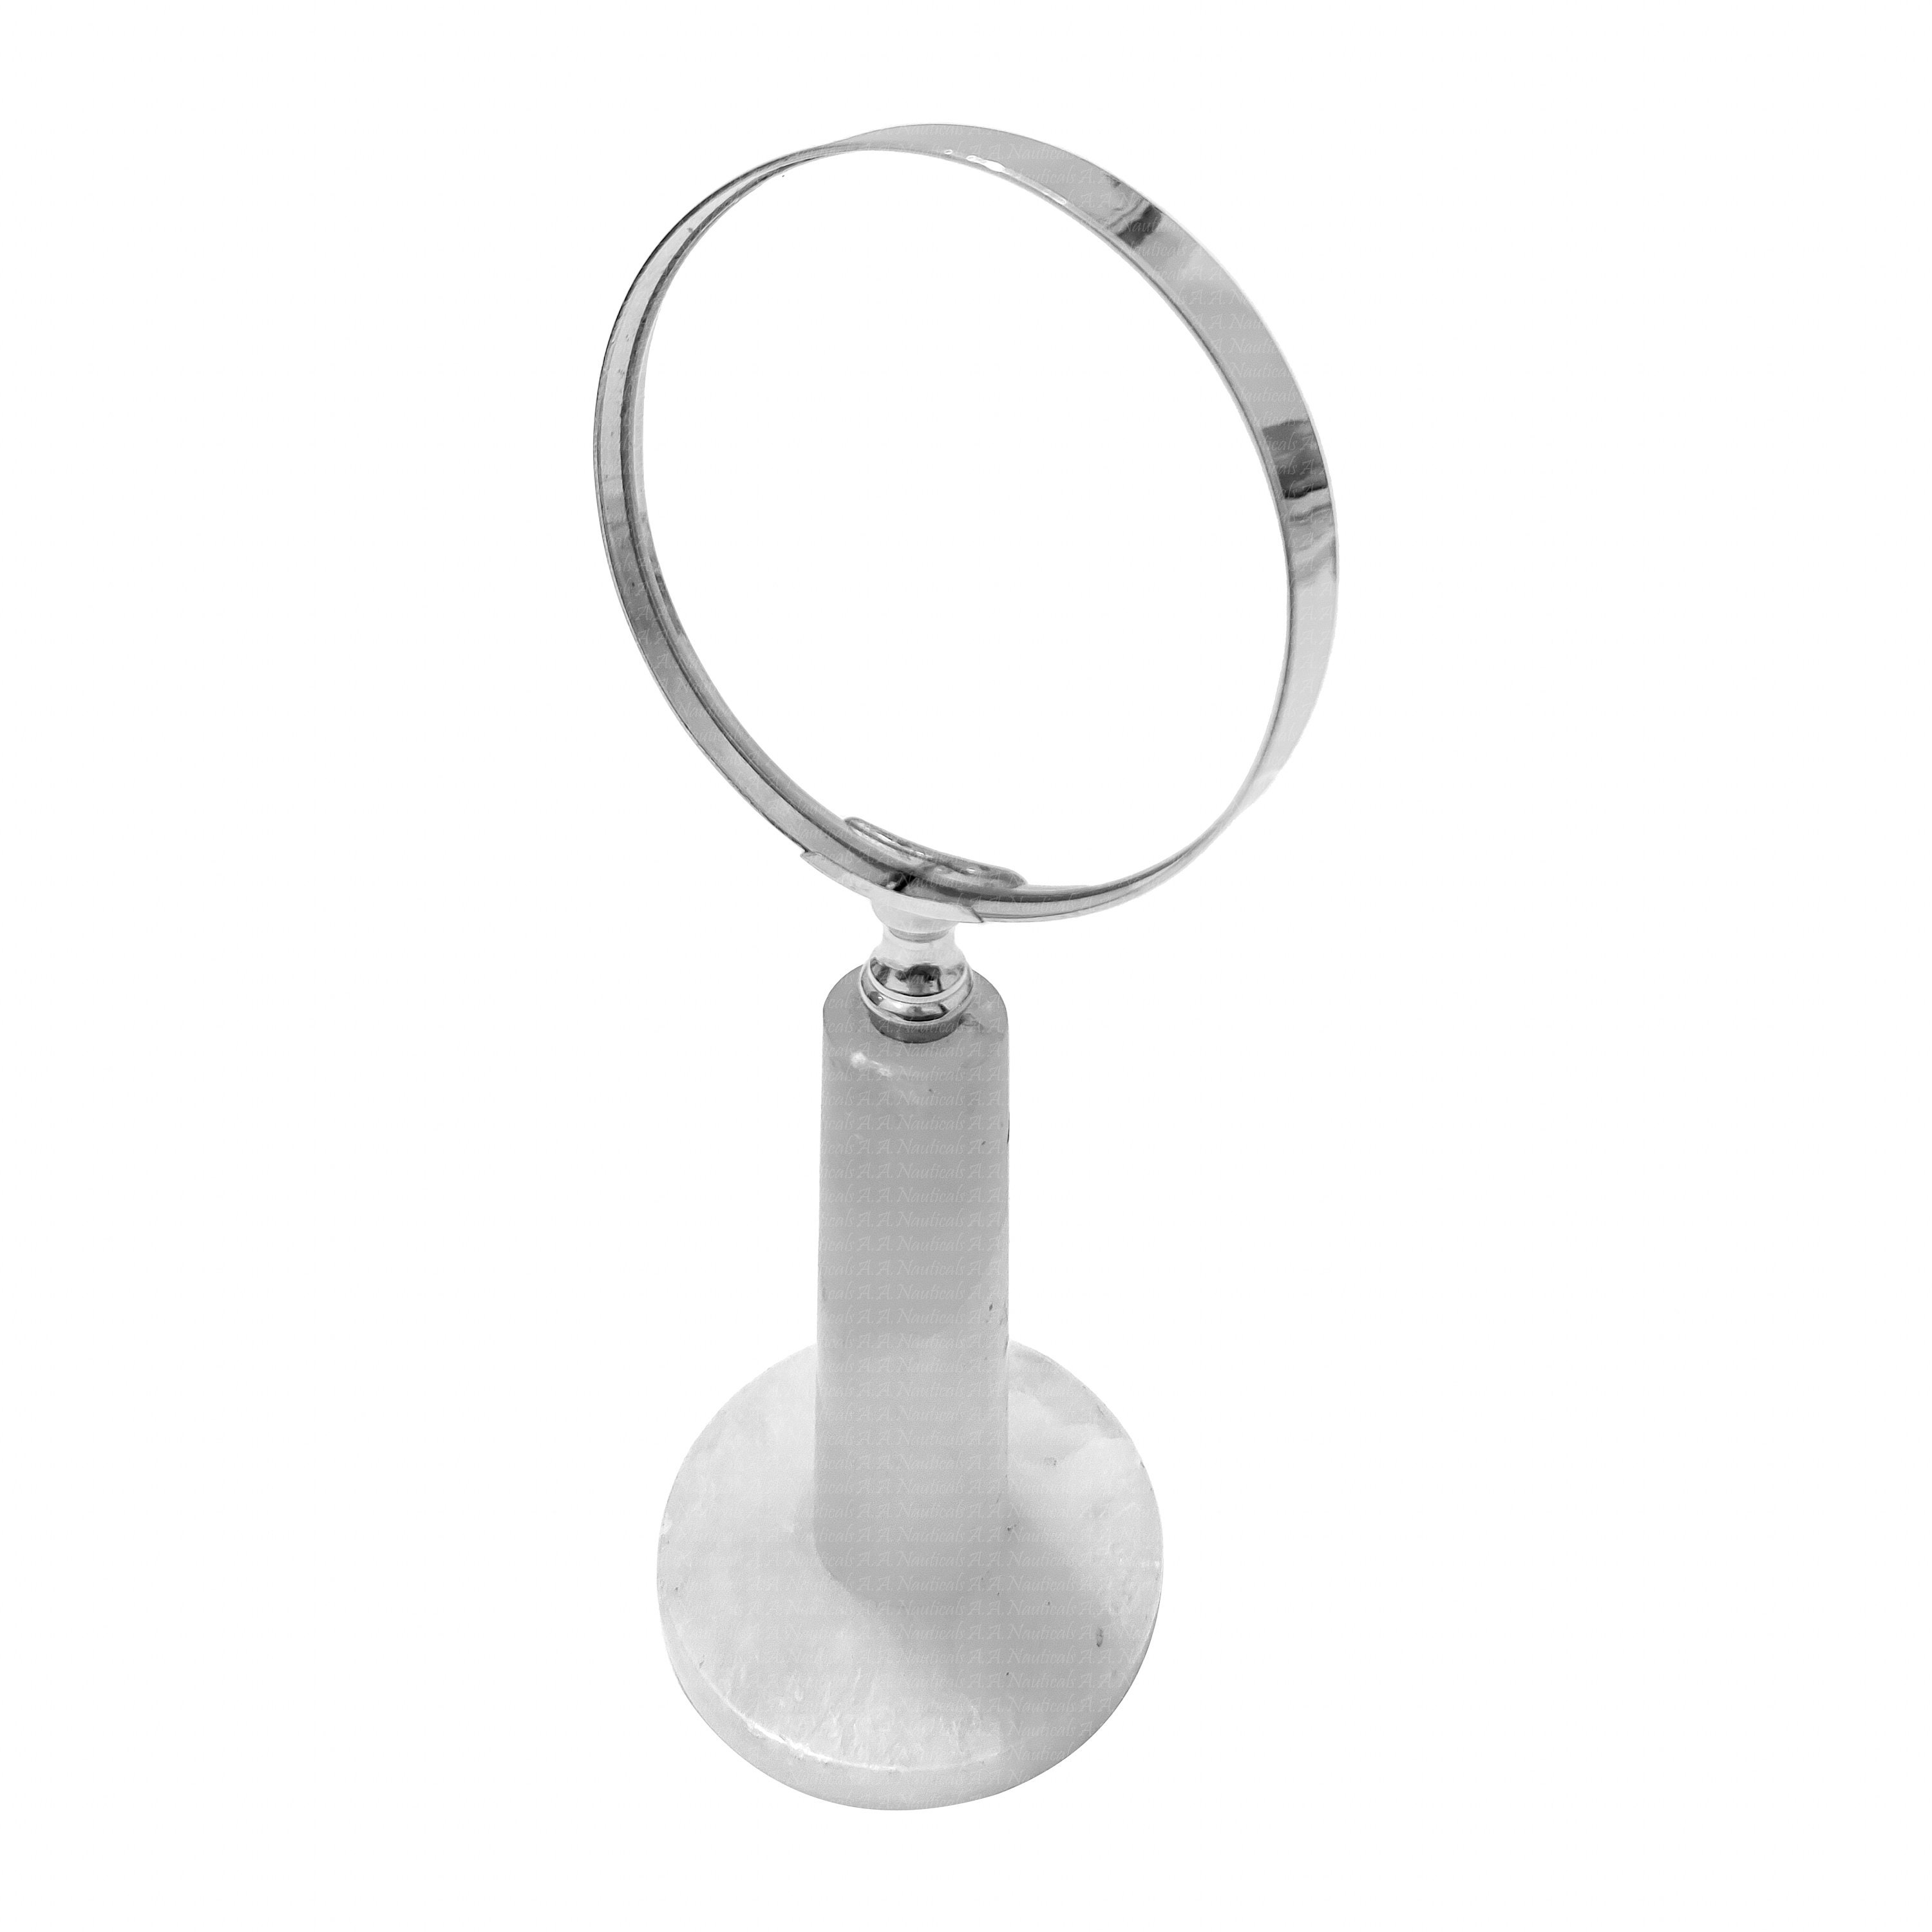 Vision Clear Magnifying Glass With LED Light Magnifier for Cross Stitch,  Jewelry, Embroidery, Knitting Sewing, Diamond Painting - Handmade